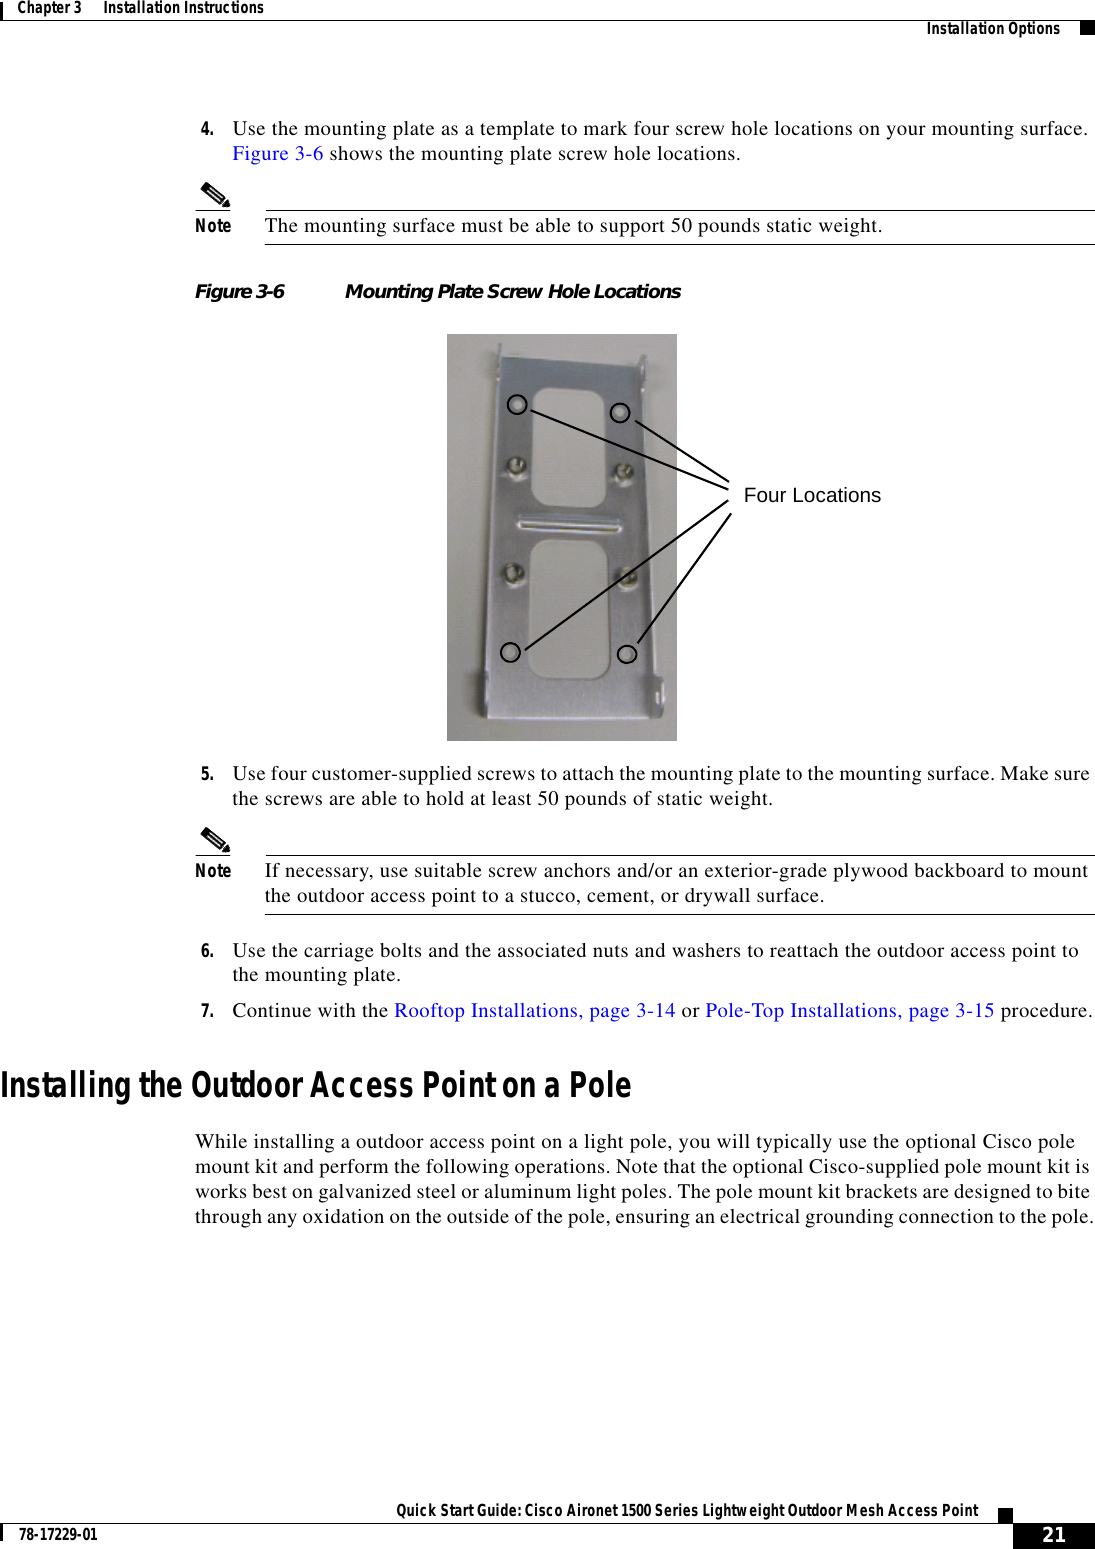  21Quick Start Guide: Cisco Aironet 1500 Series Lightweight Outdoor Mesh Access Point78-17229-01Chapter 3      Installation Instructions   Installation Options4. Use the mounting plate as a template to mark four screw hole locations on your mounting surface. Figure 3-6 shows the mounting plate screw hole locations.Note The mounting surface must be able to support 50 pounds static weight.Figure 3-6 Mounting Plate Screw Hole Locations5. Use four customer-supplied screws to attach the mounting plate to the mounting surface. Make sure the screws are able to hold at least 50 pounds of static weight.Note If necessary, use suitable screw anchors and/or an exterior-grade plywood backboard to mount the outdoor access point to a stucco, cement, or drywall surface.6. Use the carriage bolts and the associated nuts and washers to reattach the outdoor access point to the mounting plate.7. Continue with the Rooftop Installations, page 3-14 or Pole-Top Installations, page 3-15 procedure.Installing the Outdoor Access Point on a PoleWhile installing a outdoor access point on a light pole, you will typically use the optional Cisco pole mount kit and perform the following operations. Note that the optional Cisco-supplied pole mount kit is works best on galvanized steel or aluminum light poles. The pole mount kit brackets are designed to bite through any oxidation on the outside of the pole, ensuring an electrical grounding connection to the pole.Four Locations